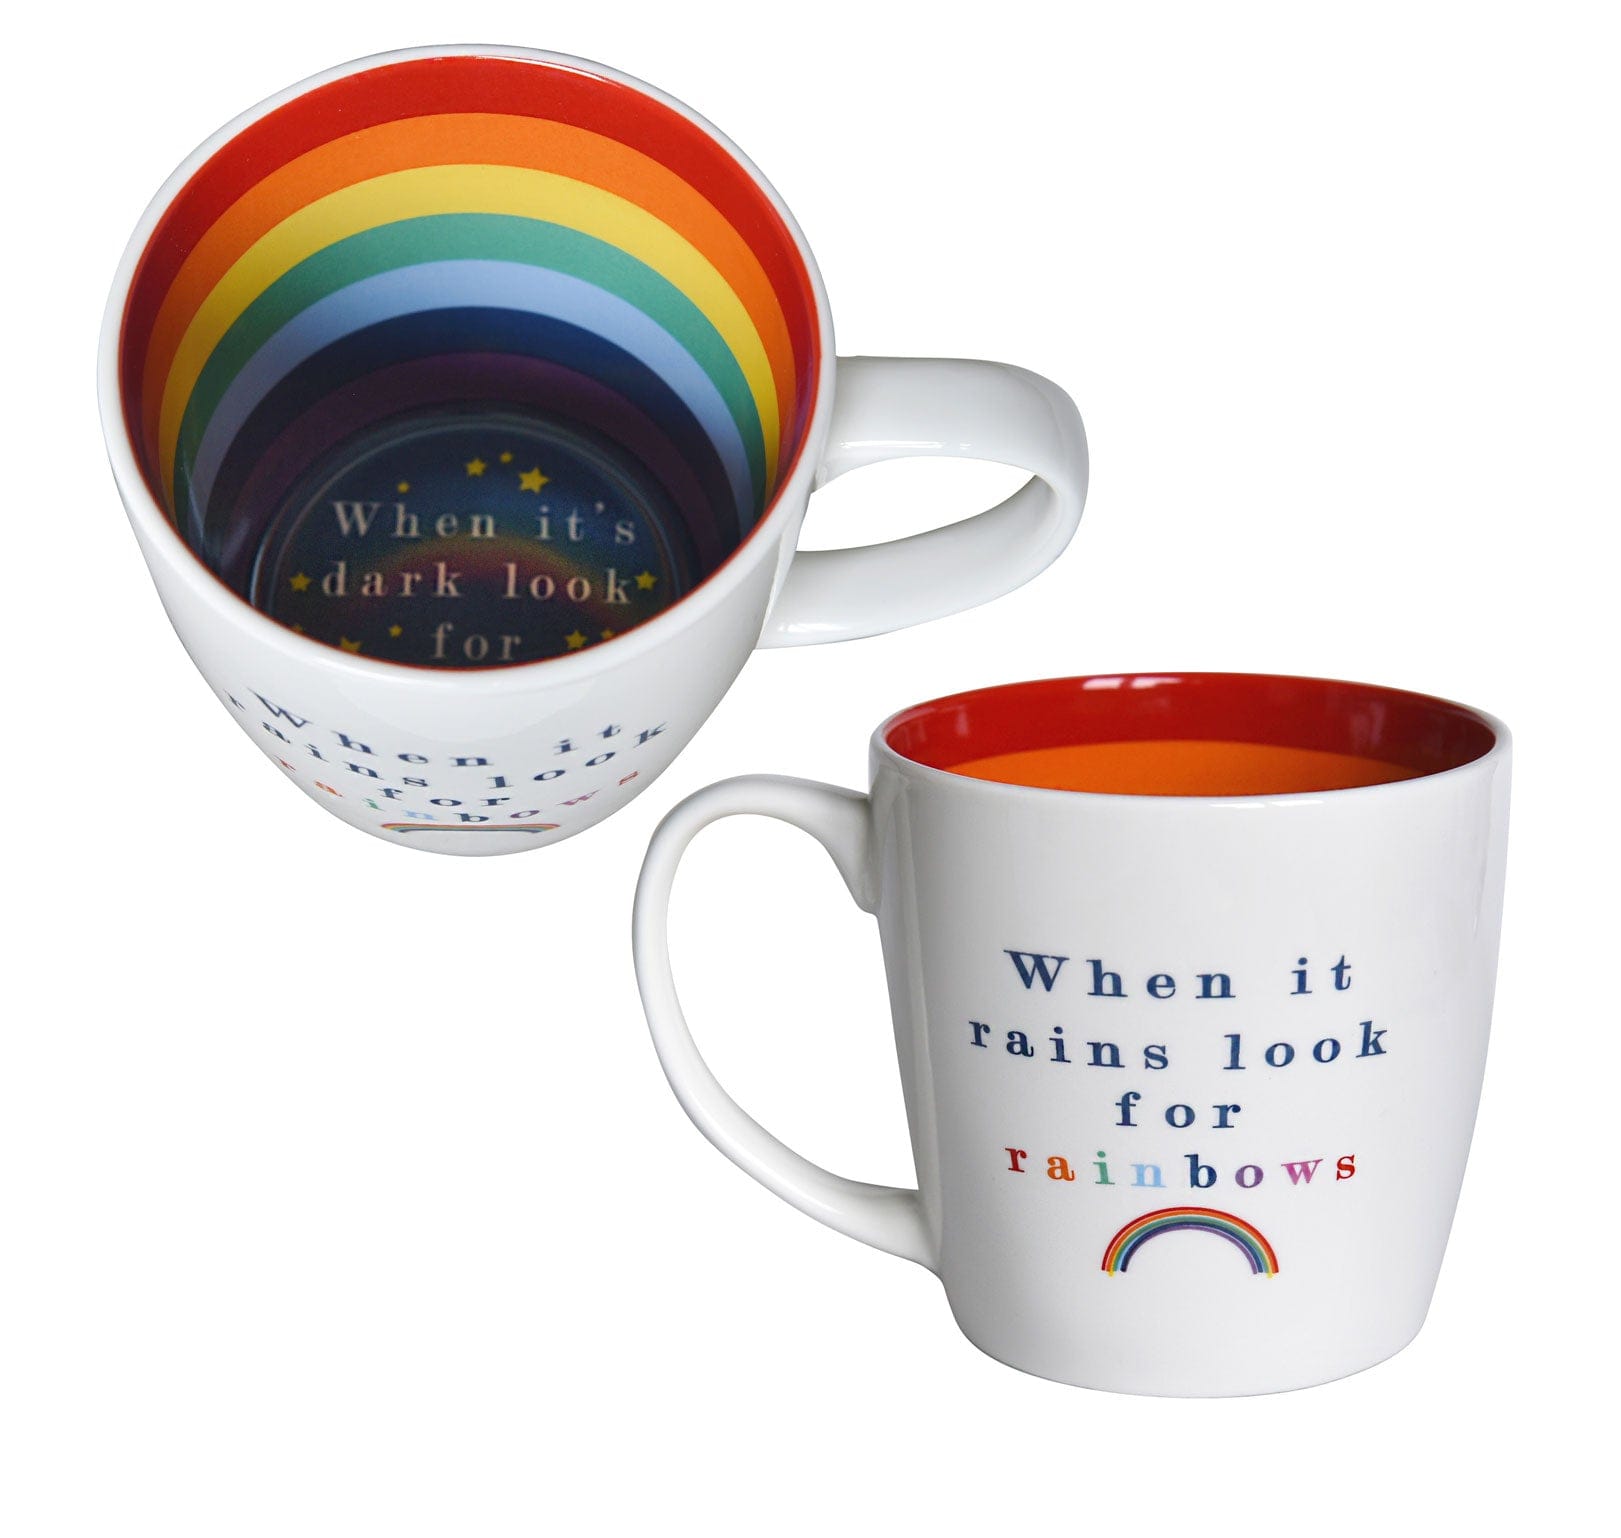 WPL Gifts Mug Inside Out Mug With Gift Box - When it Rains look for rainbows